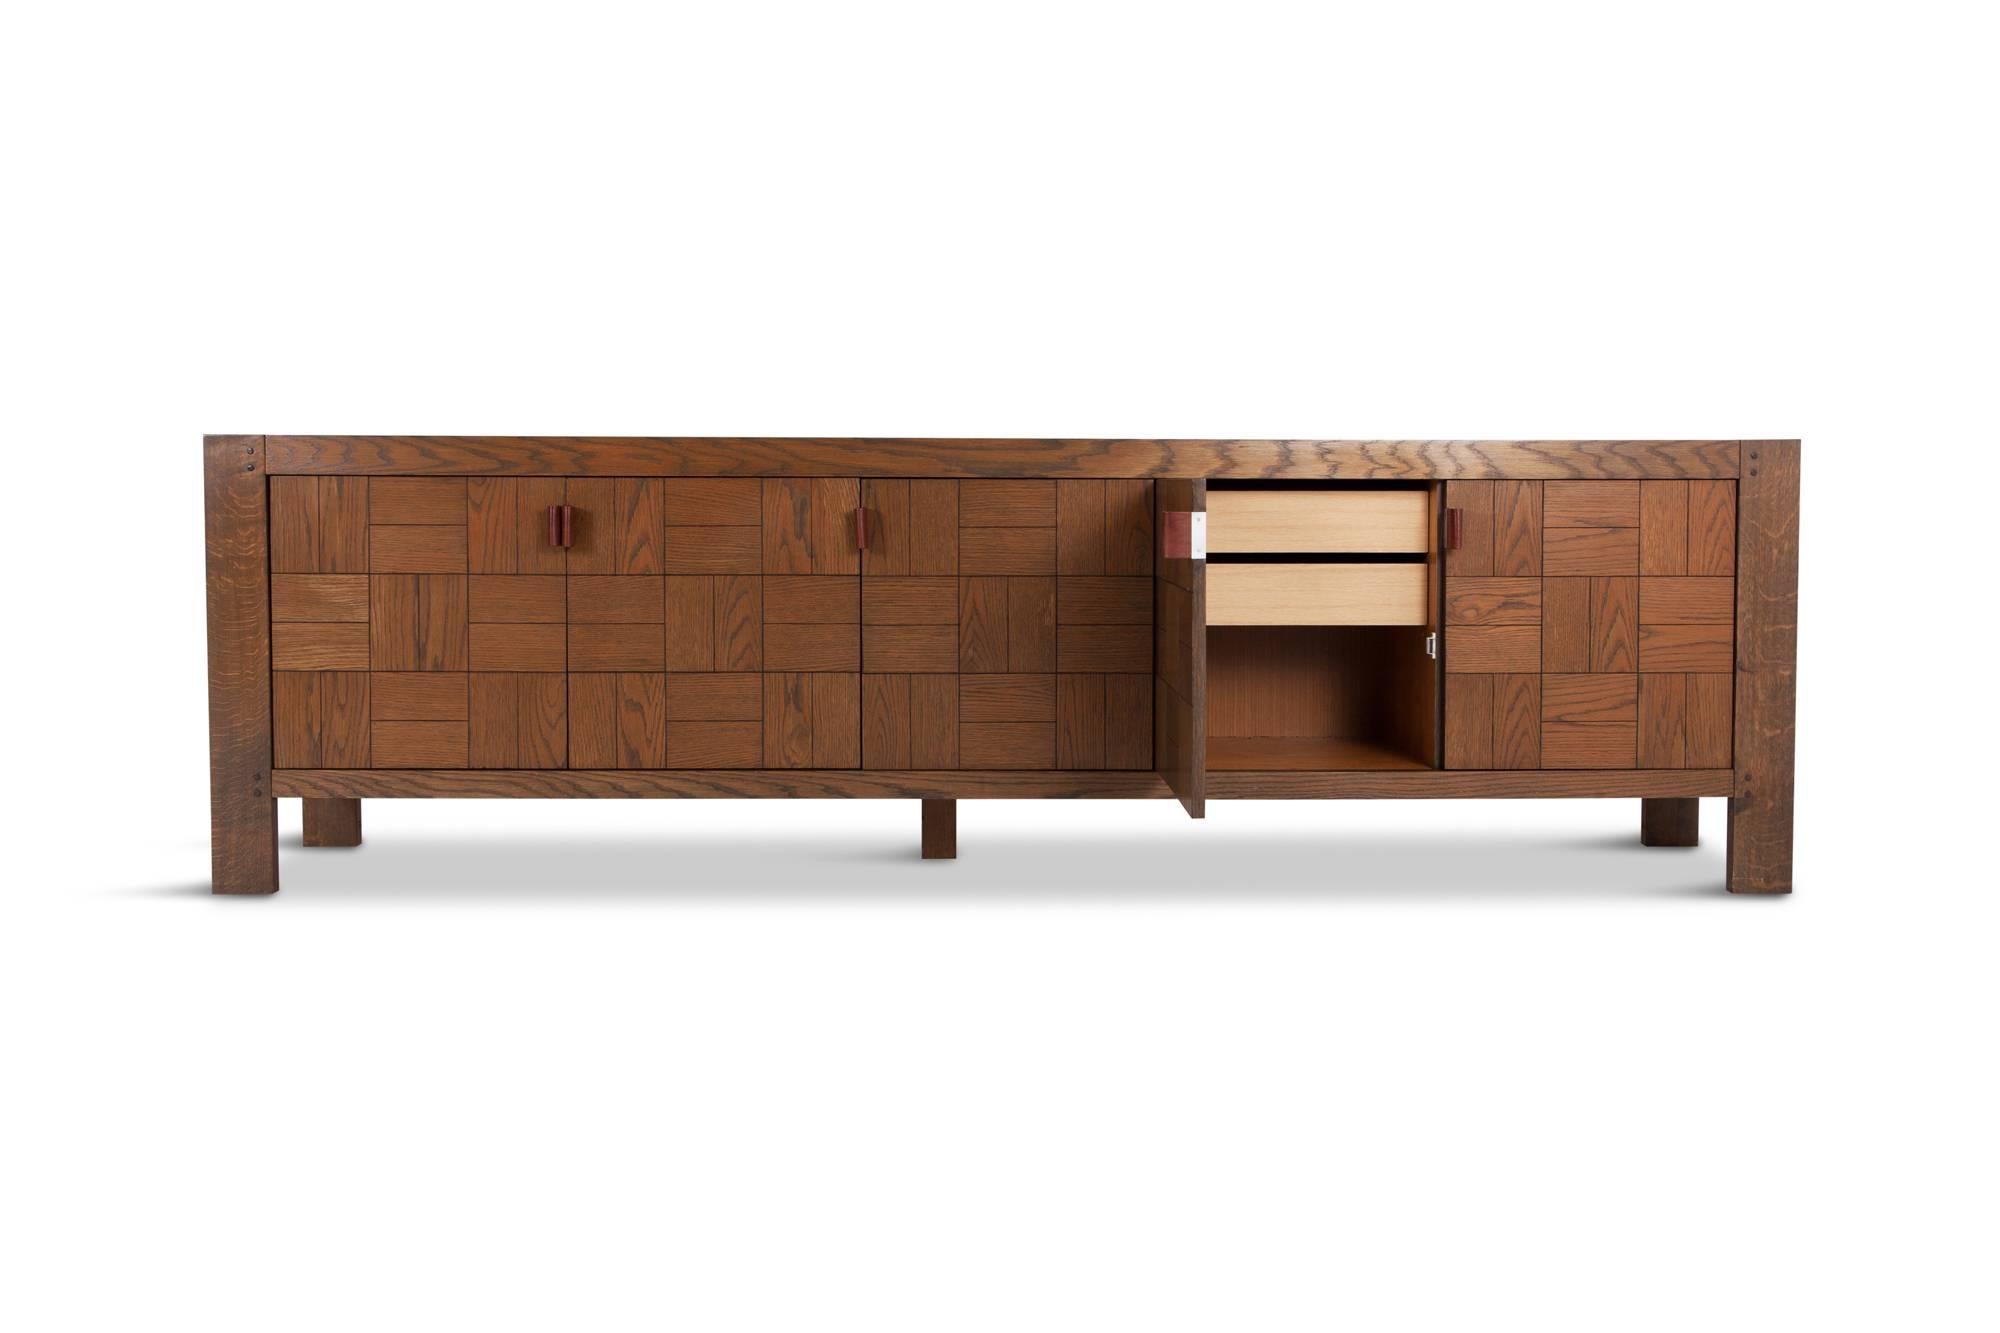 post-modern Scarpa style brutalist credenza. The cabinet is provided with geometric  door panels with stained oak inlay and finished with beautiful cognac leather door handles. The cabinets shows a beautiful grain and provides plenty of storage